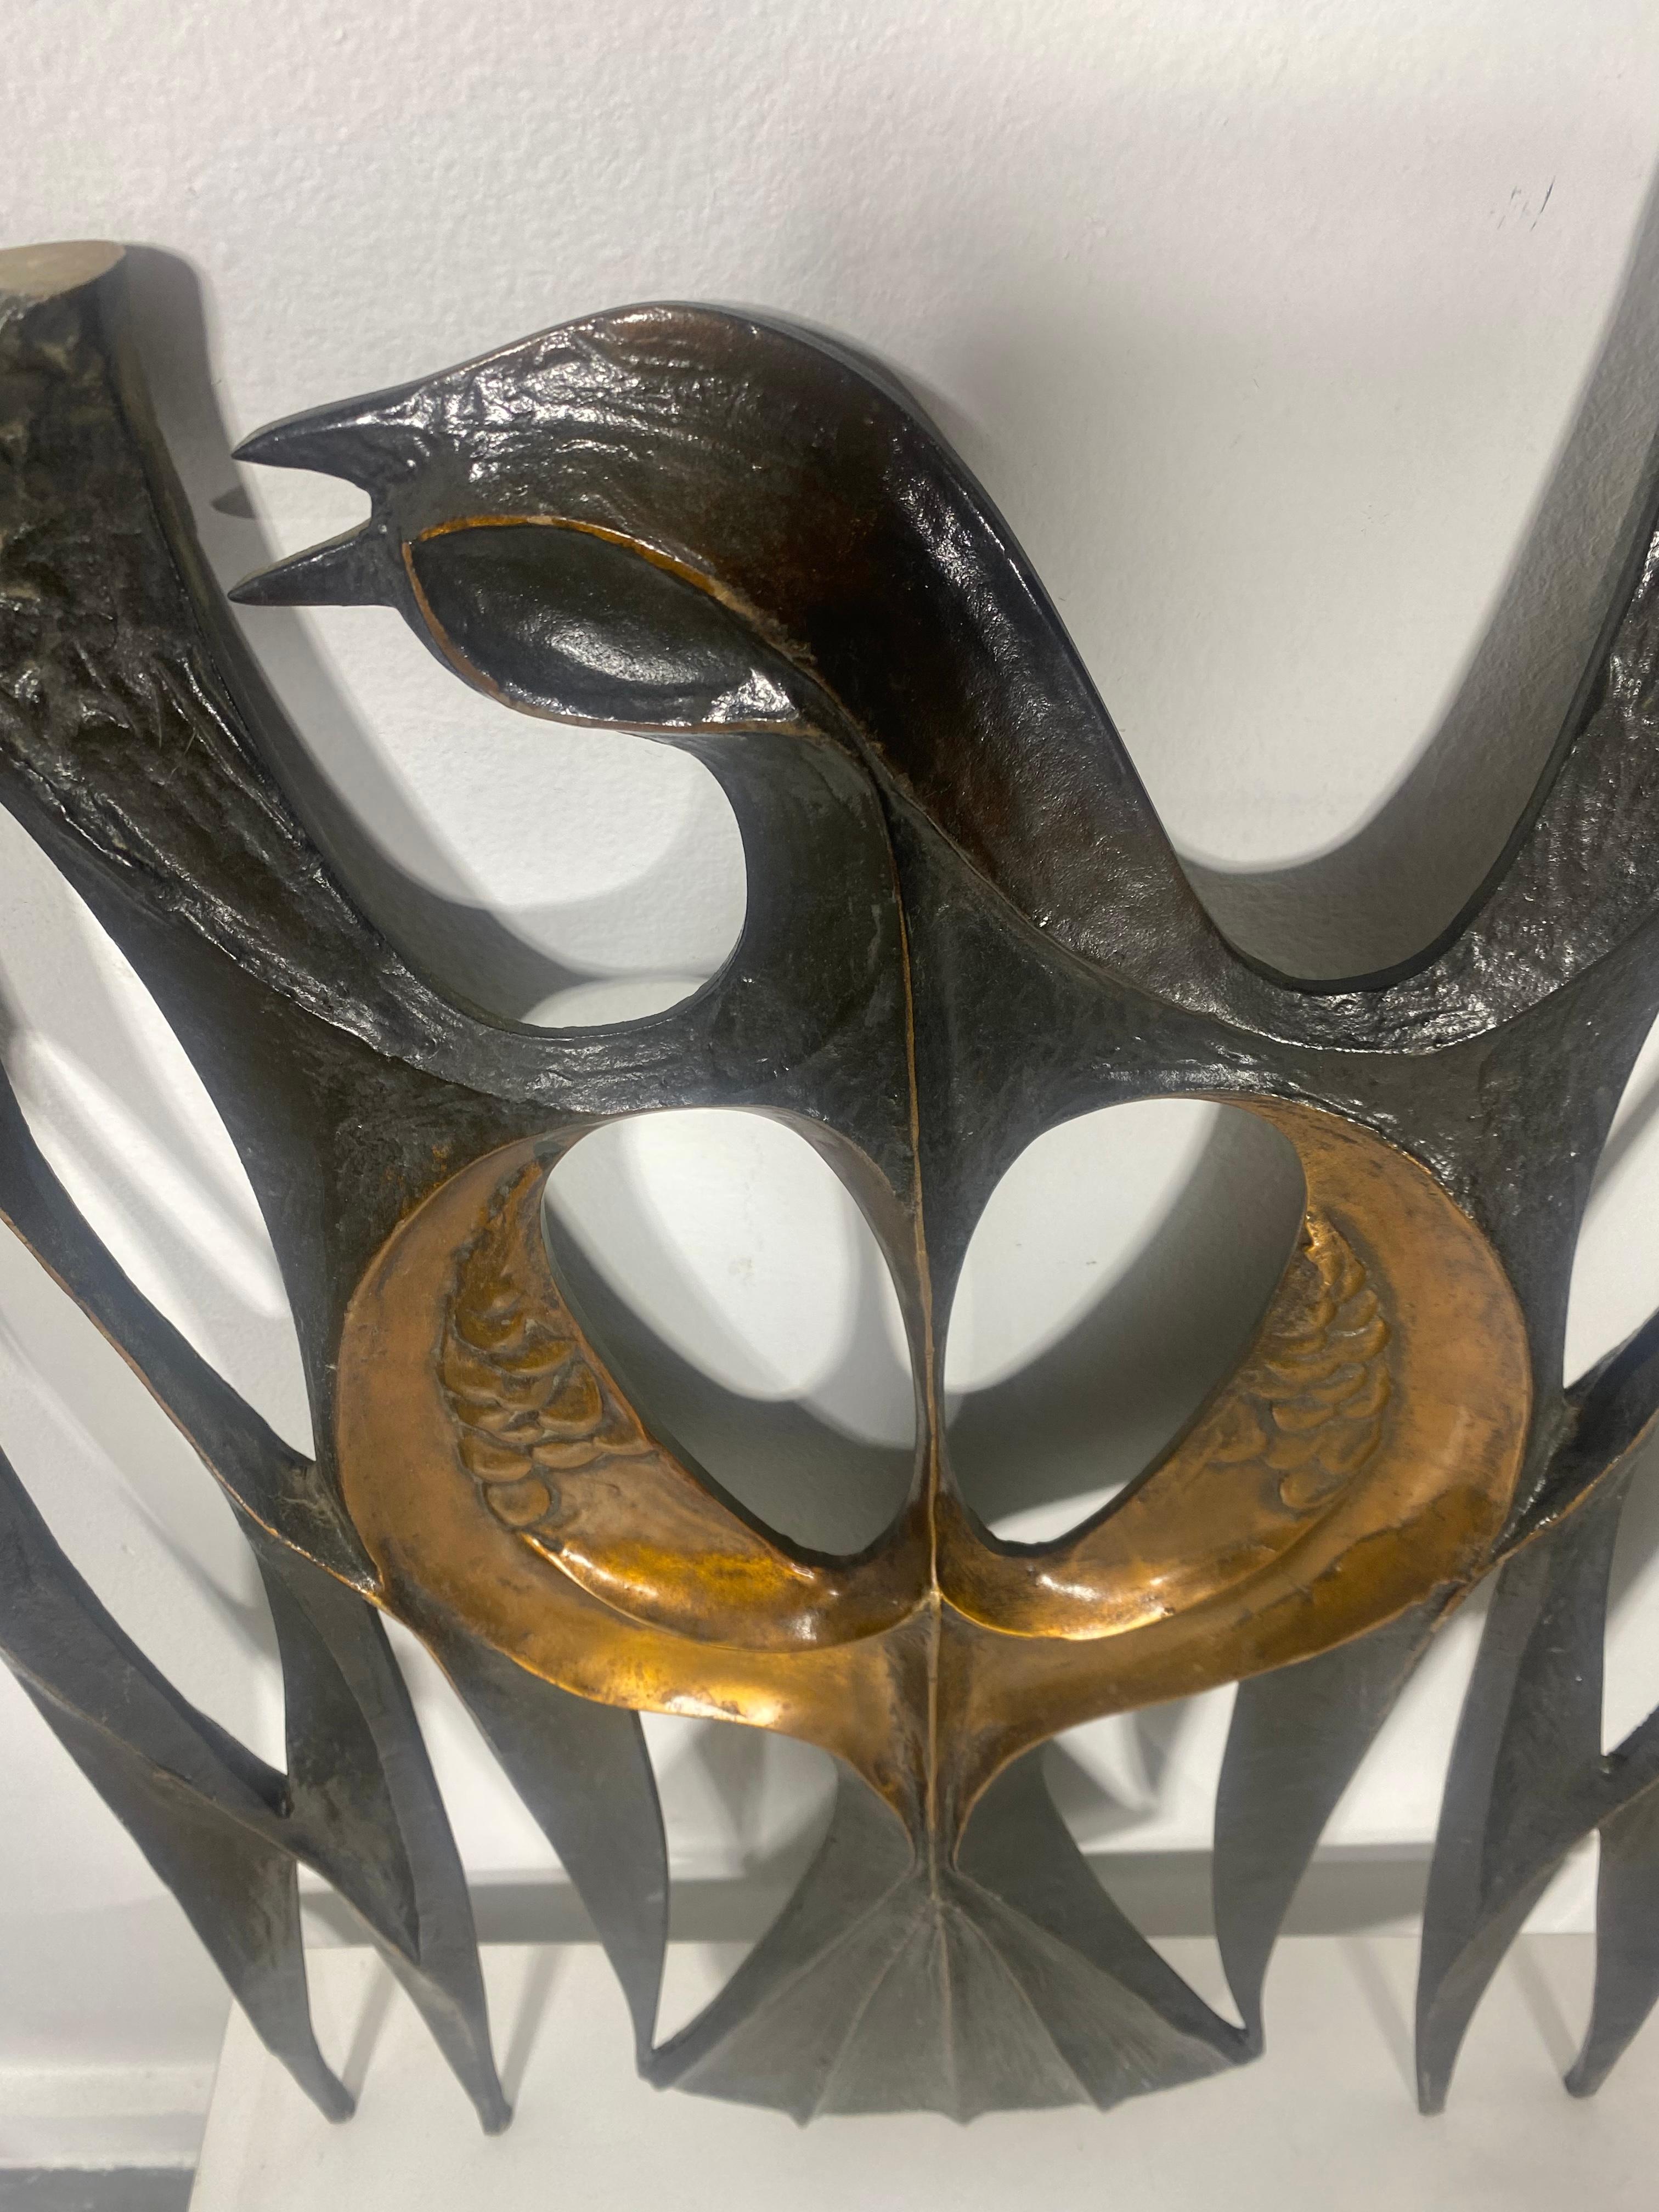 Super Stylized Cast Bronze Sculpture depicting a Dove. Salvaged from Downtown Buffalo New York Church, most likely part of a railing, alter. Amazing detail.Definitely created by a skilled artist.